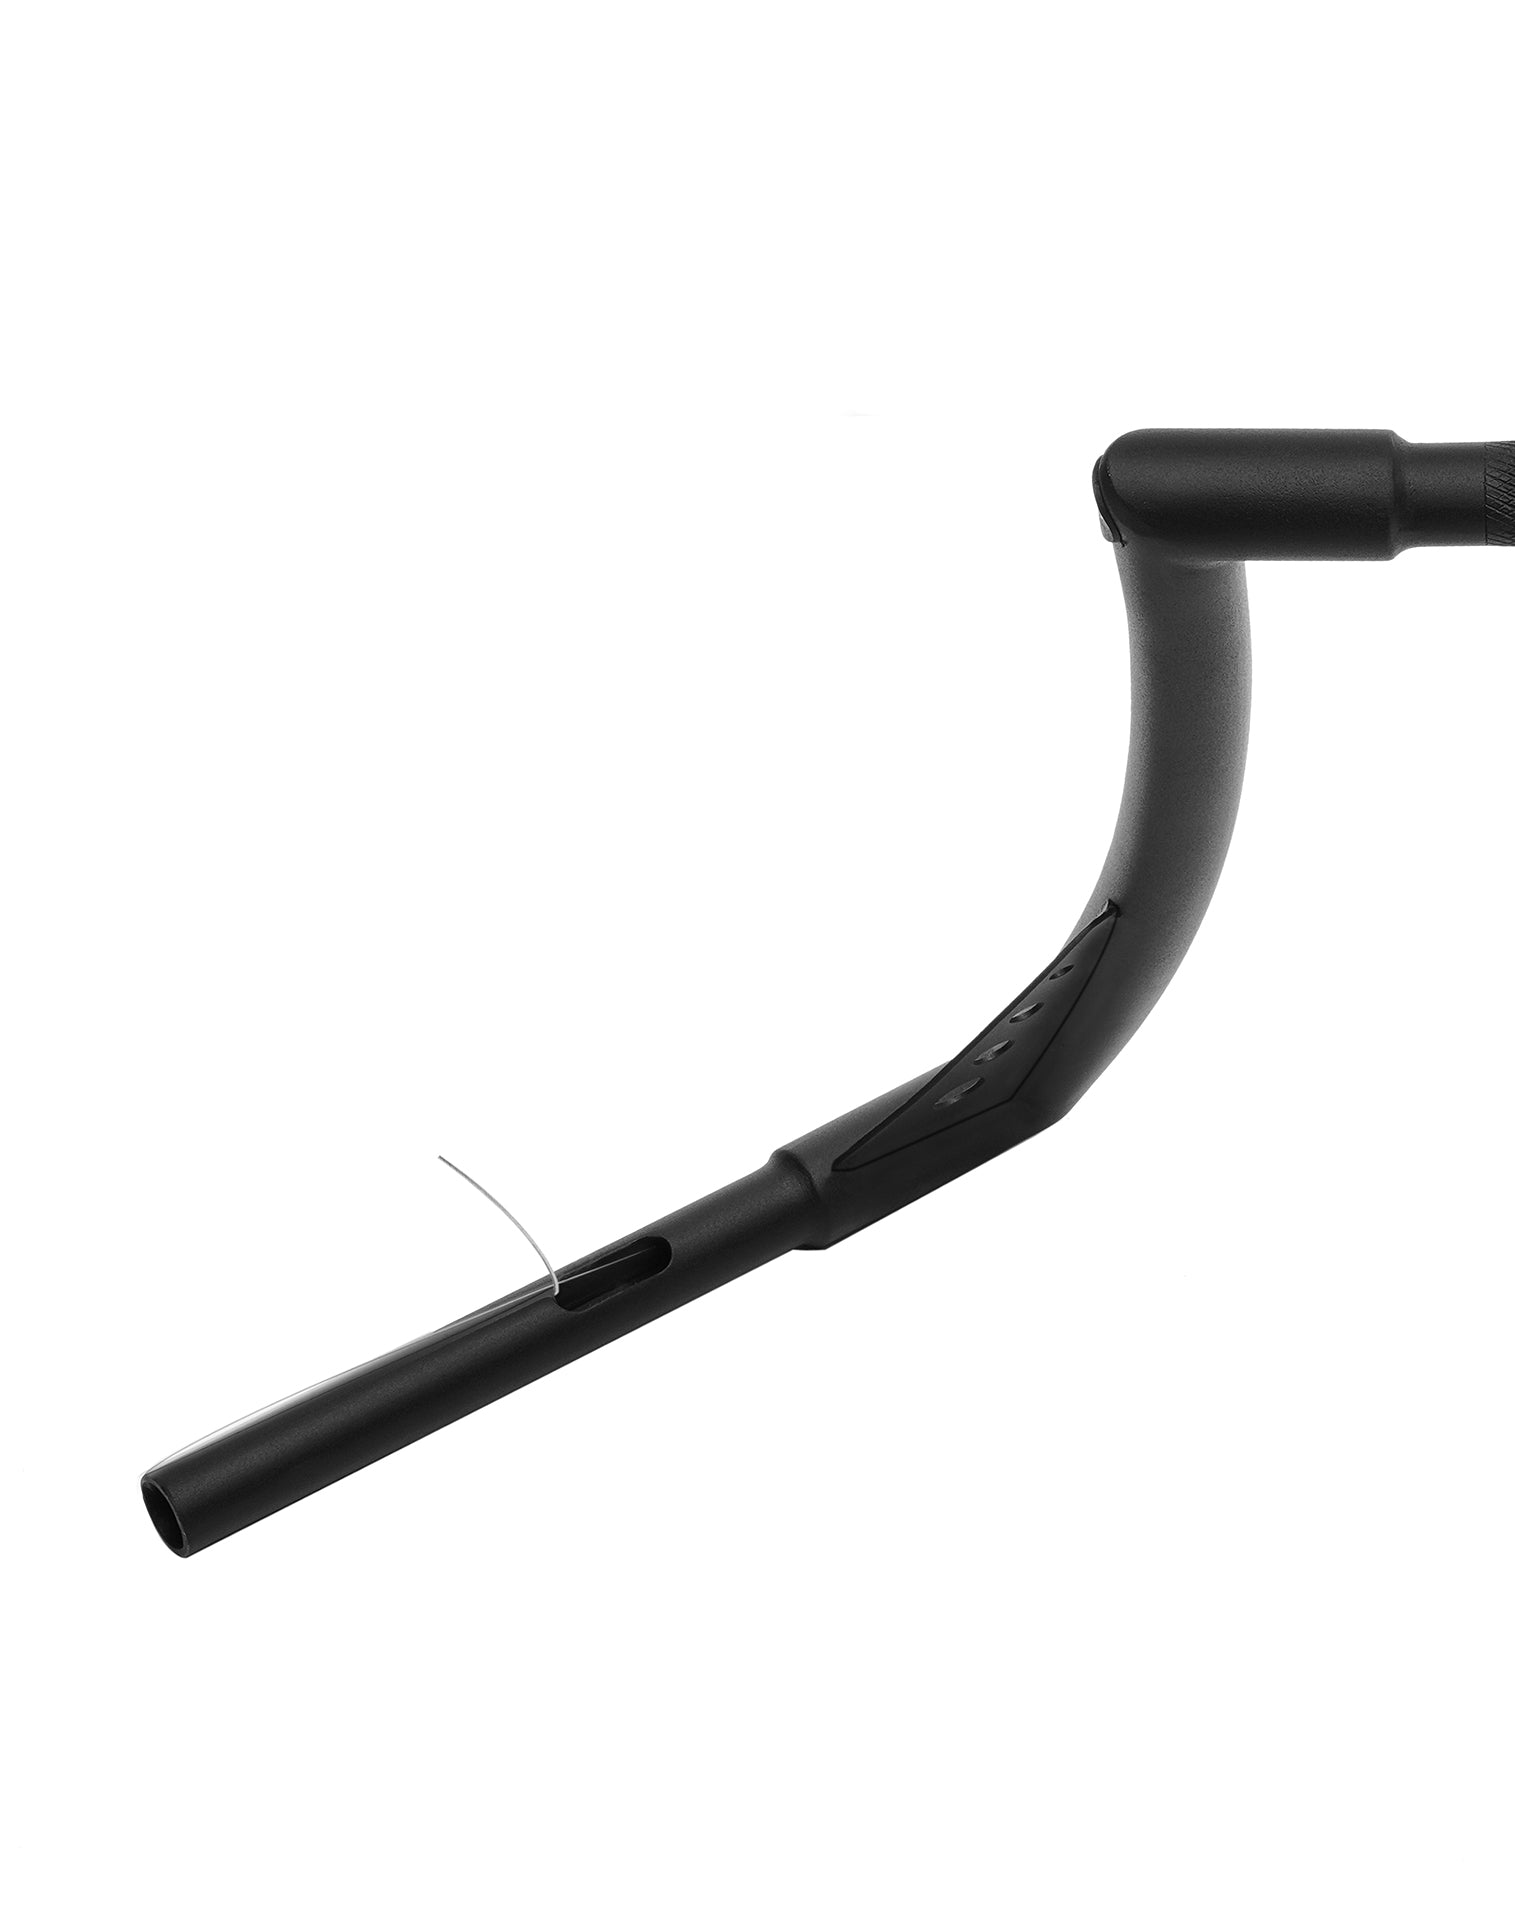 Viking Iron Born 12" Handlebar for Harley Sportster Forty Eight Matte Black Close up View